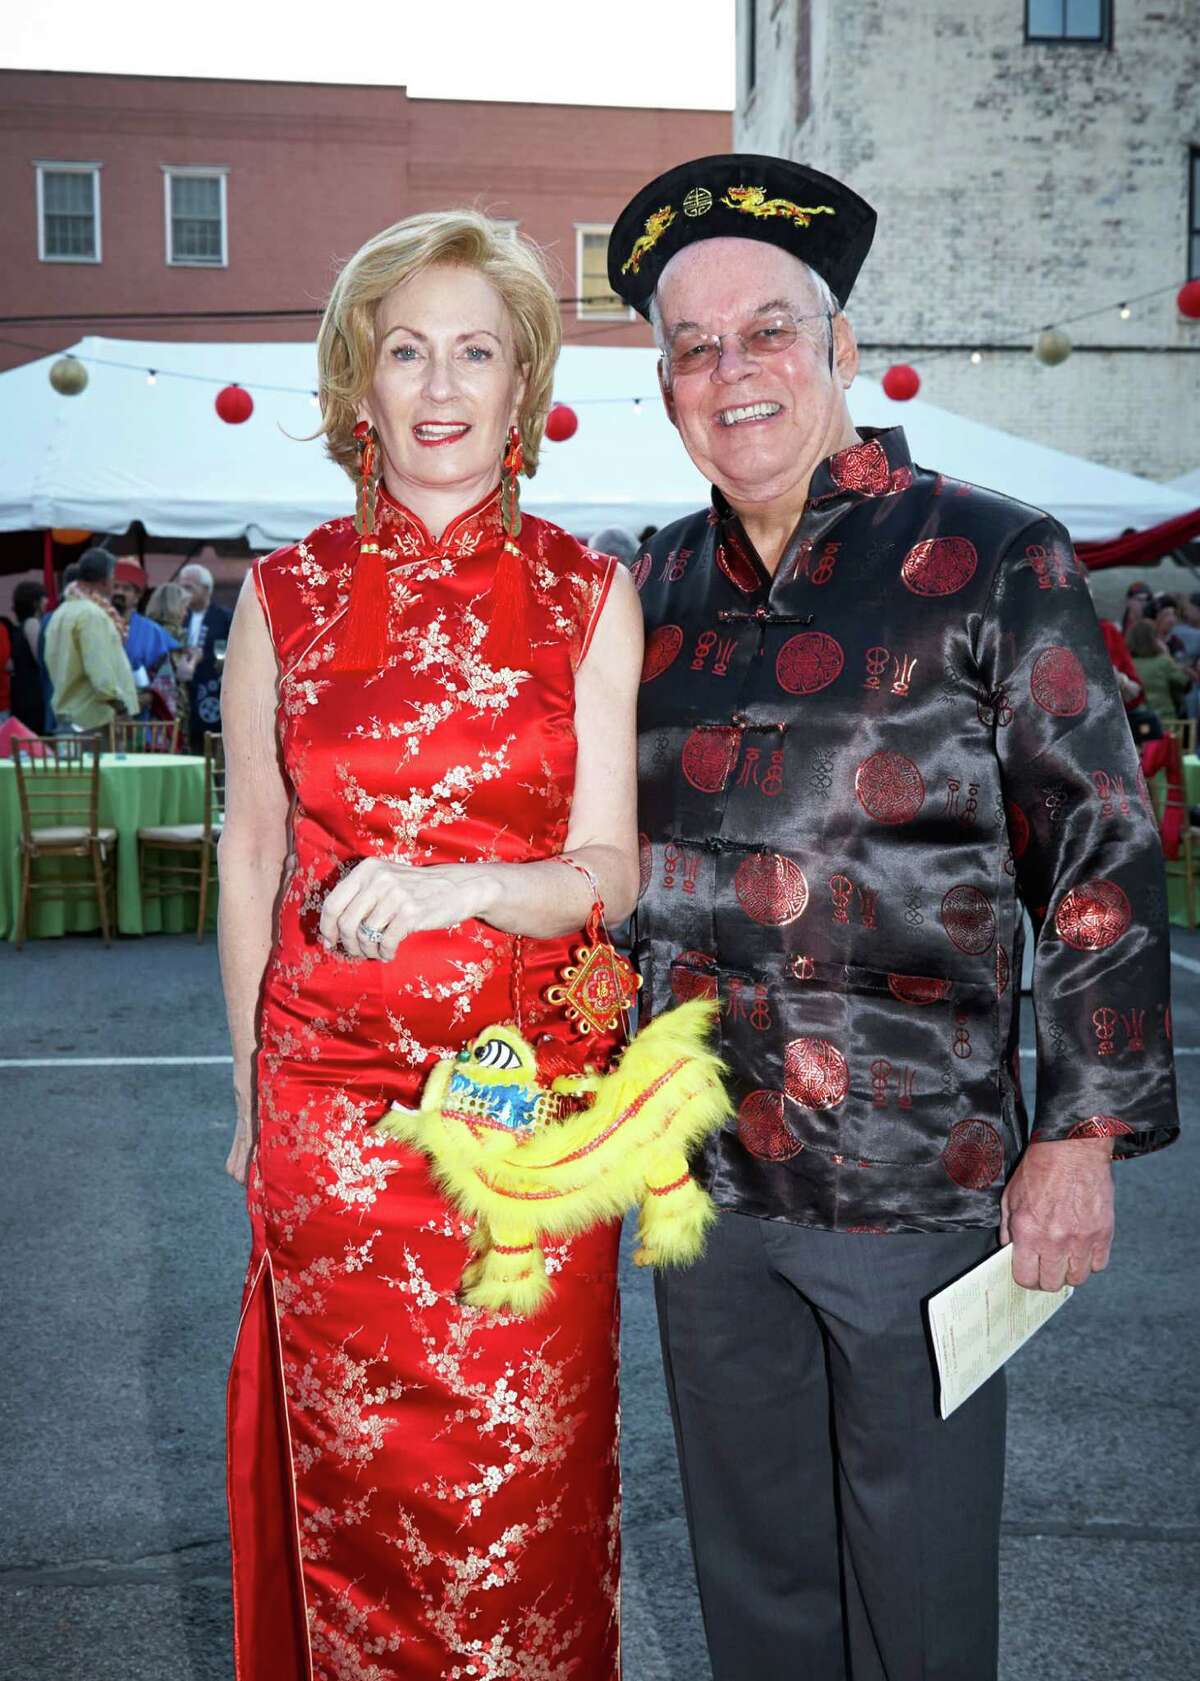 Lucy and Nat Day get into the spirit of things at Family Centers' "Night of the Dragon" benefit. The event recreated an an authentic Chinatown street festival.